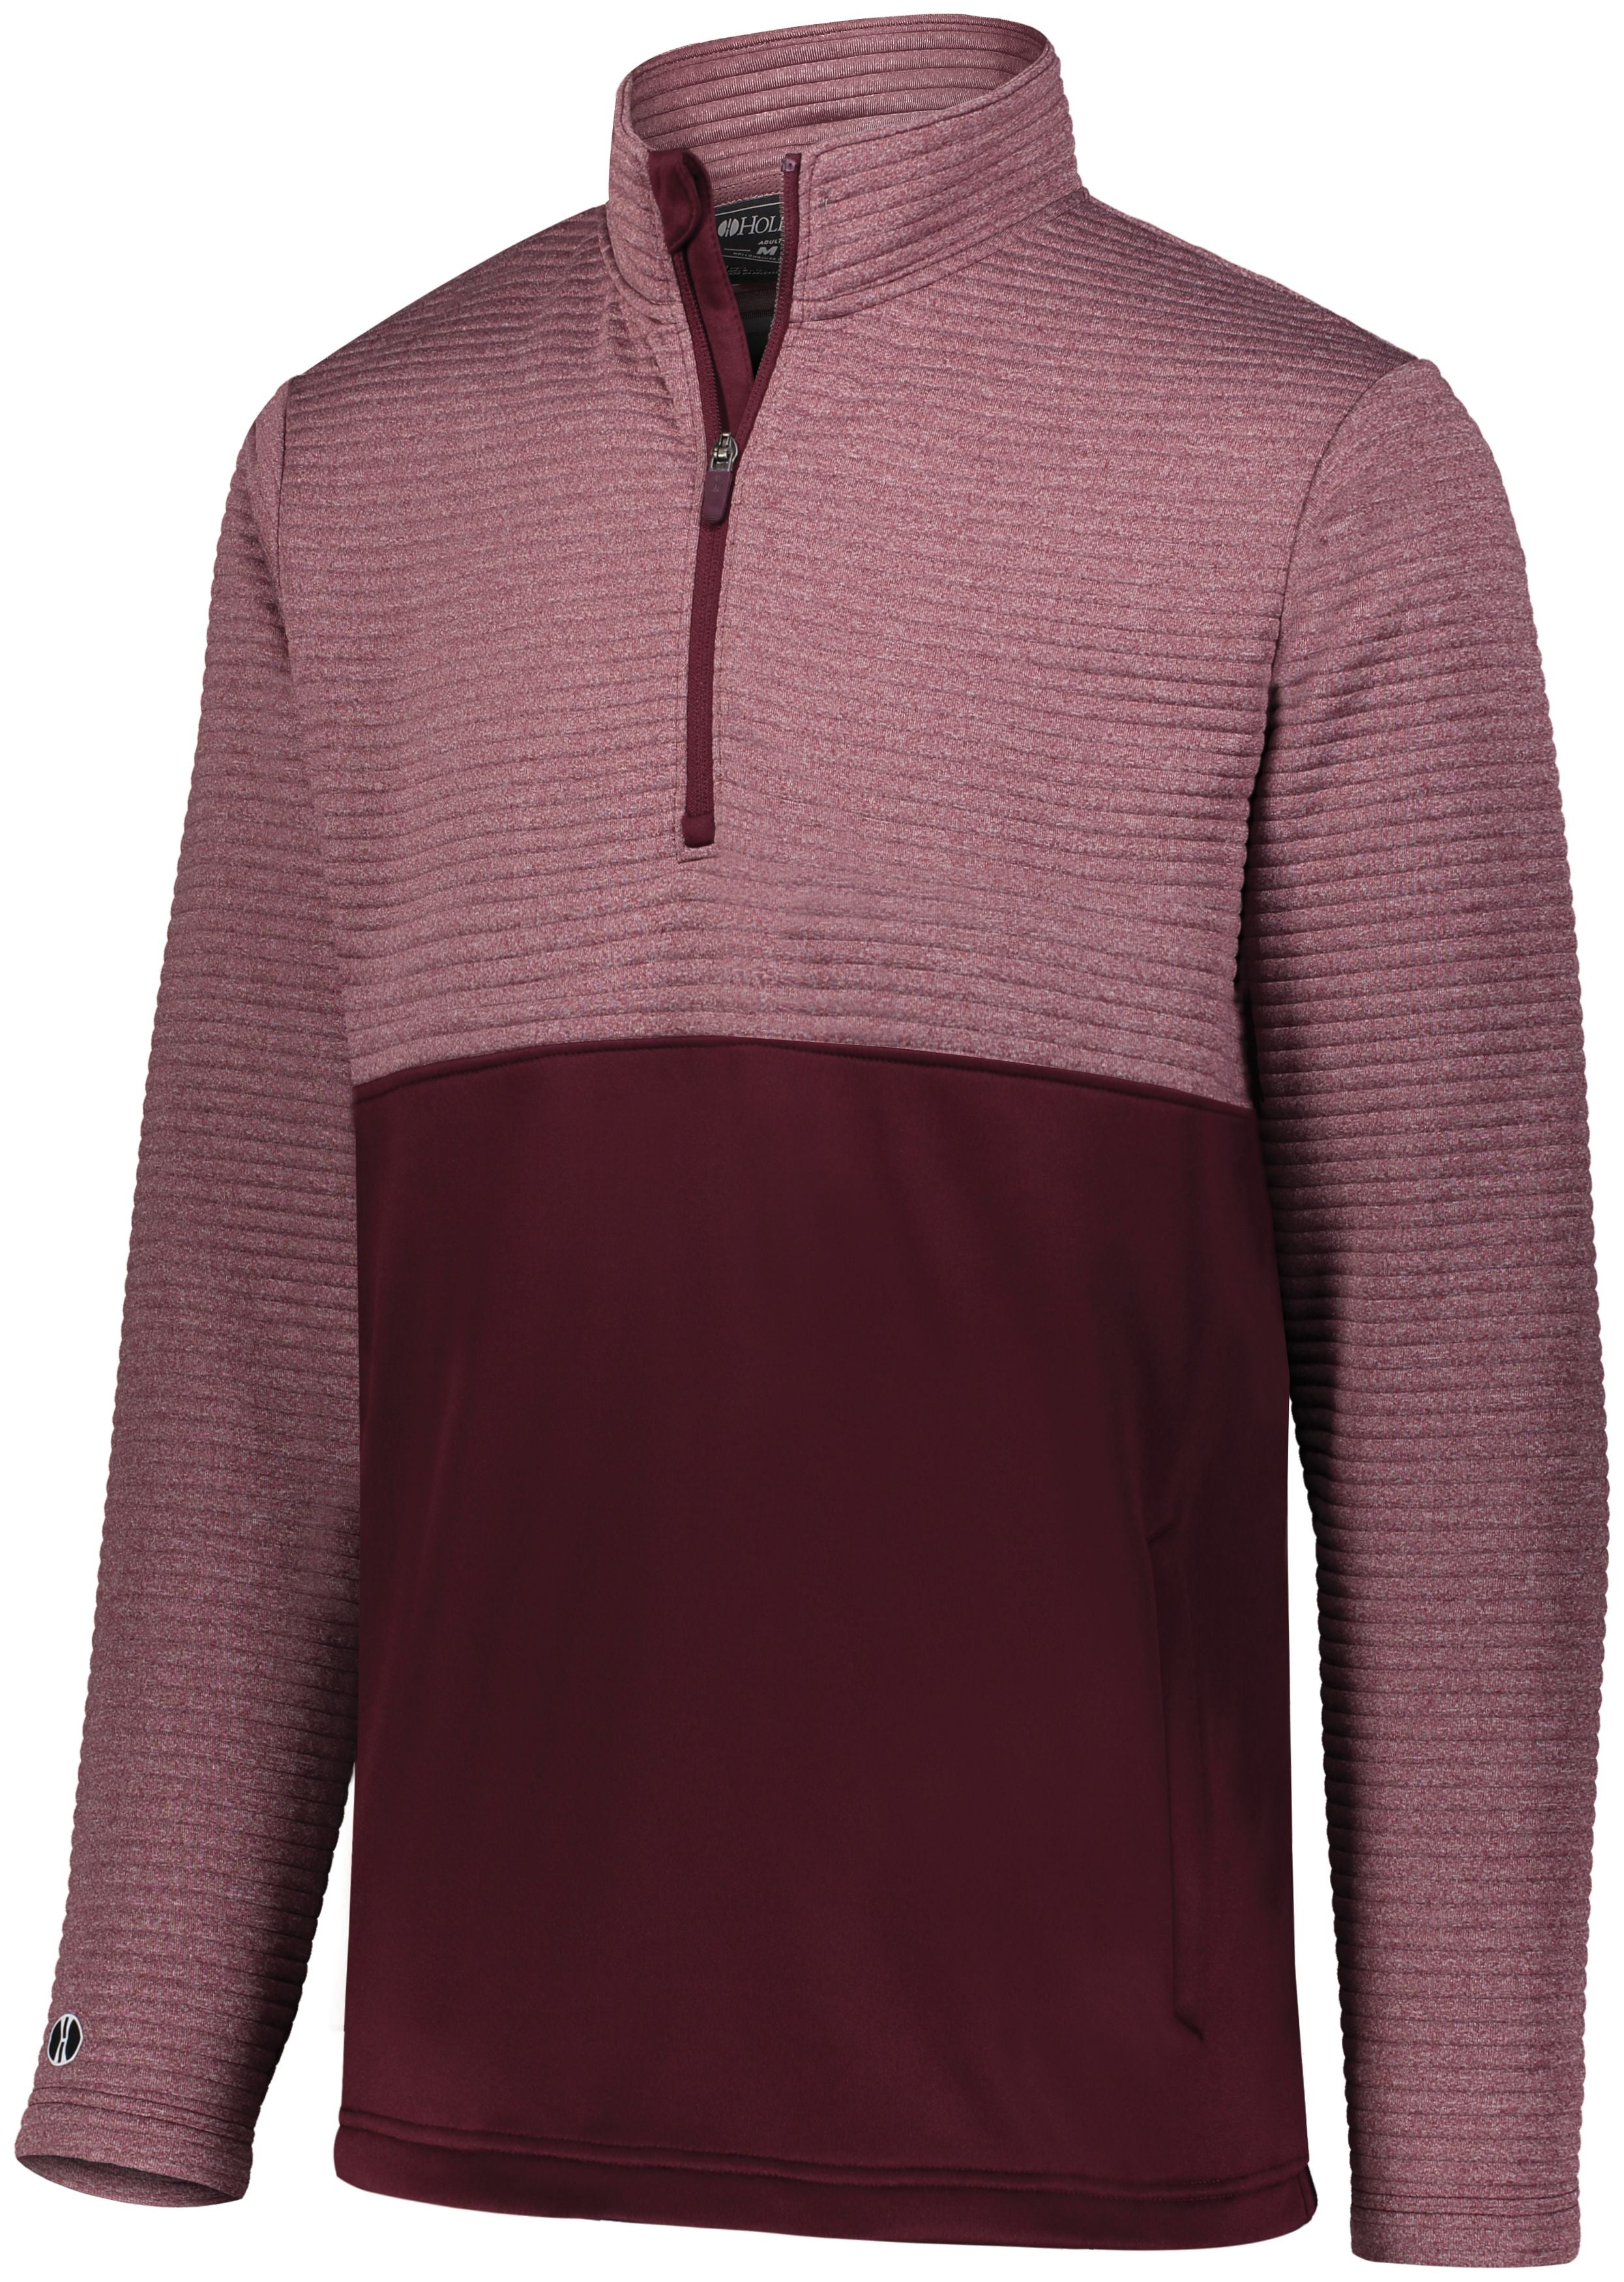 Holloway 3D Regulate Pullover in Maroon Heather/Maroon  -Part of the Adult, Adult-Pullover, Holloway, Outerwear, 3D-Collection product lines at KanaleyCreations.com